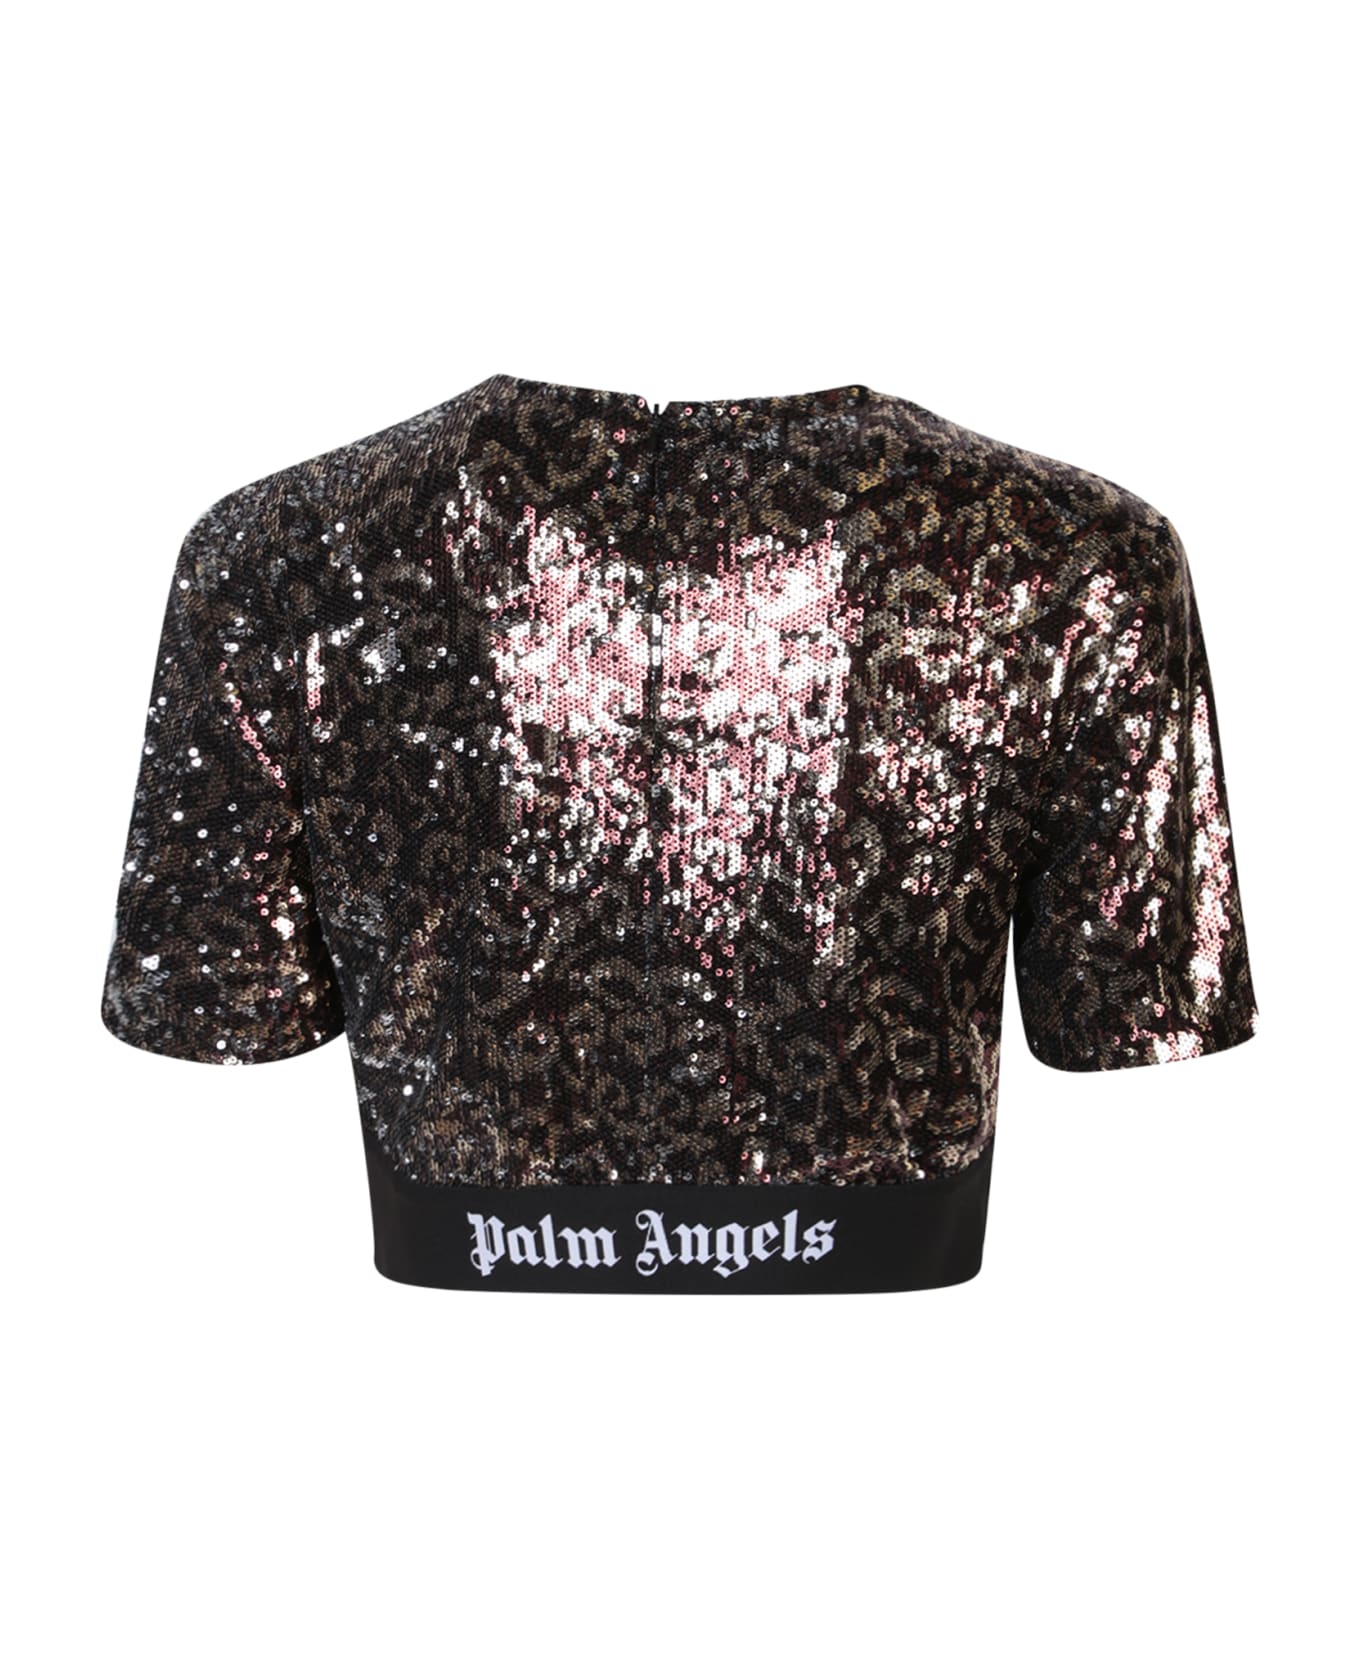 Palm Angels Sequin Embellished Cropped Top - Brown Black Tシャツ